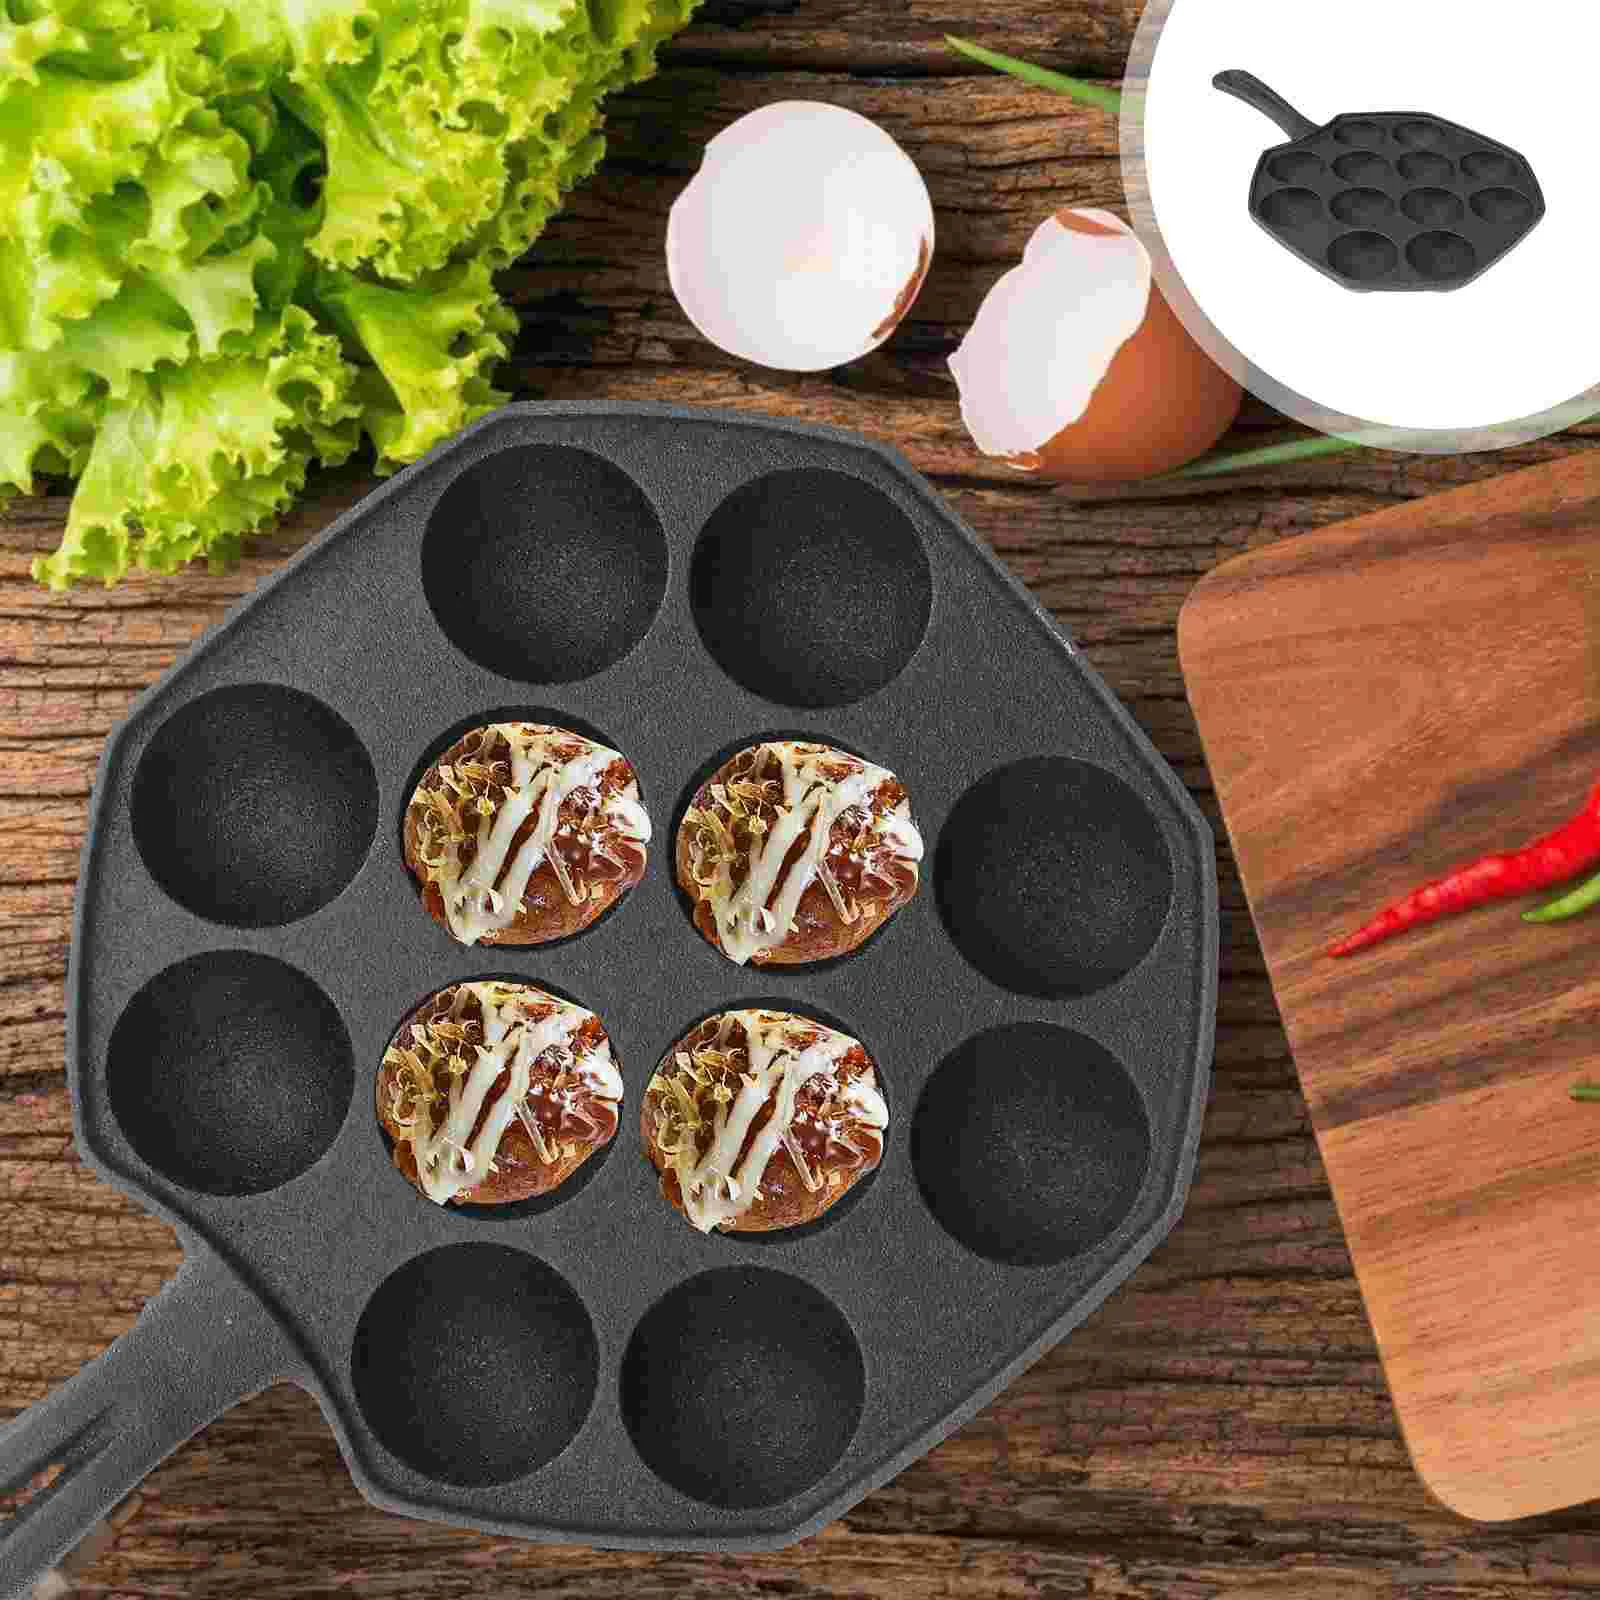 

Cavities Takoyaki Maker Grill Pan Molds Cast Iron Octopus Ball Plate Non-stick Baking Forms Mold Tray Kitchen Cooking Tools